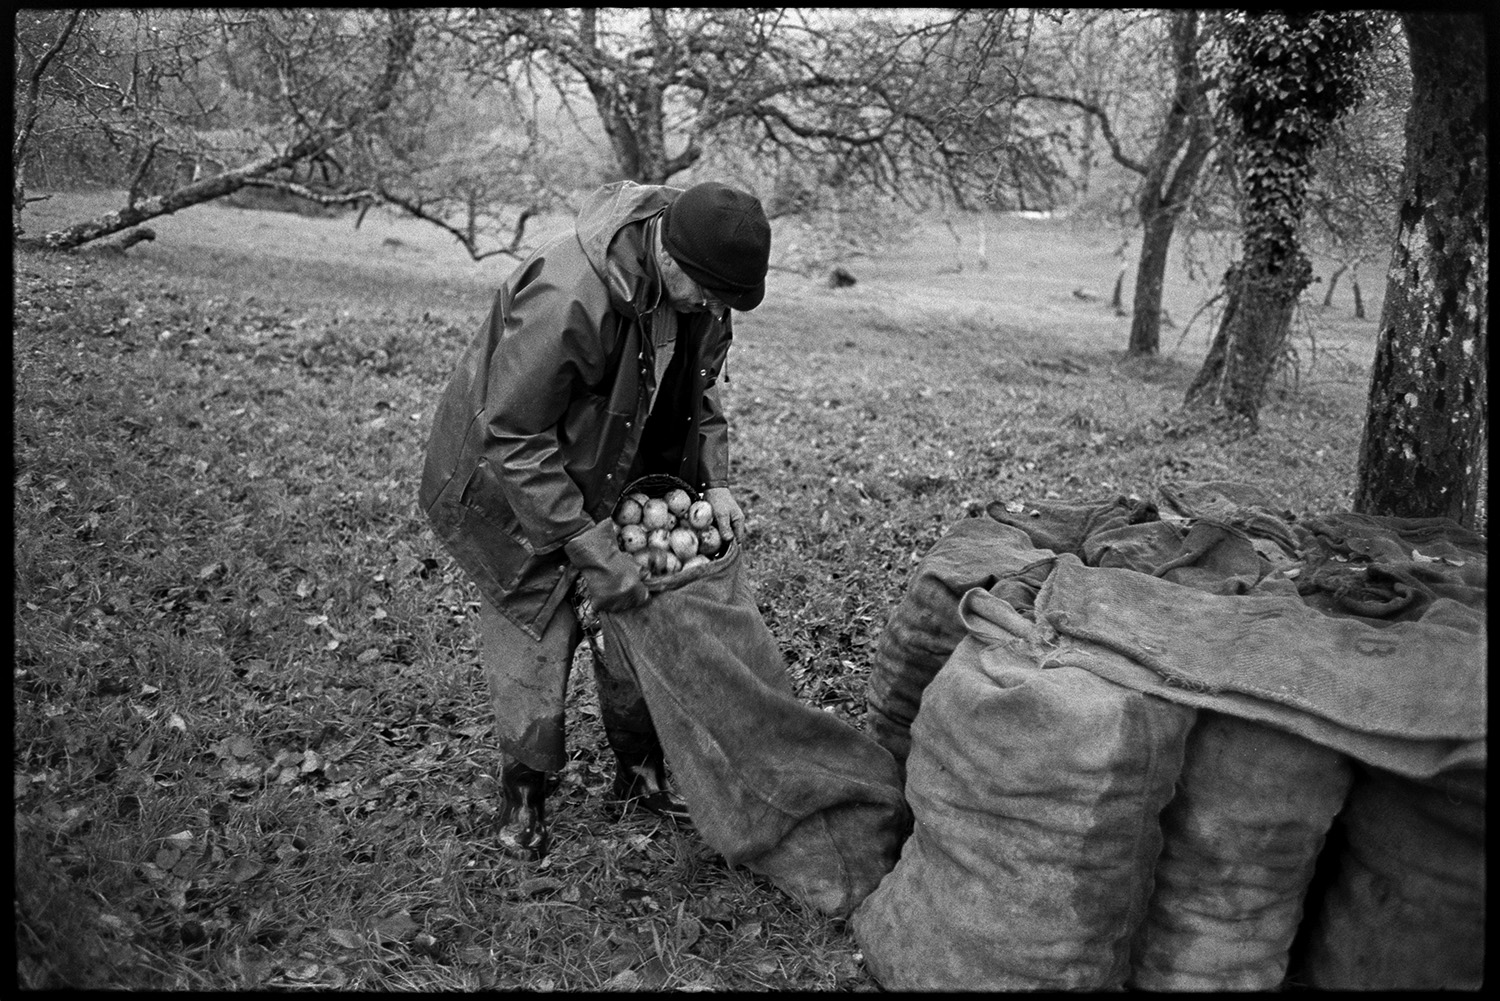 Cider orchard, man shaking apples from trees and bagging them up.
[A man bagging up apples in a cider orchard at Westpark, Iddesleigh. Full sacks are stacked around an apple tree.]